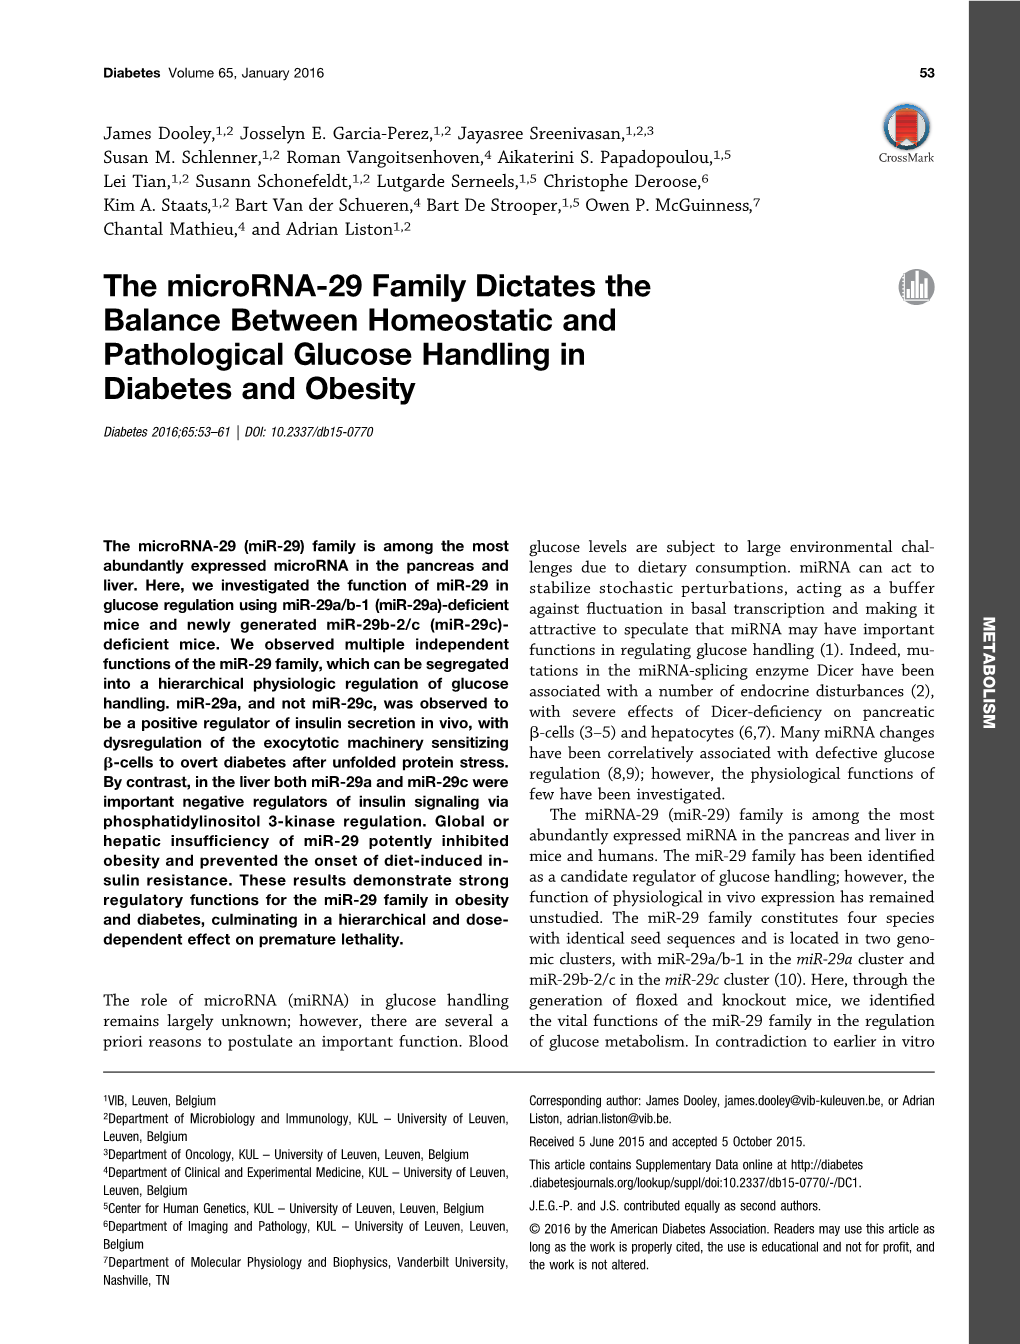 The Microrna-29 Family Dictates the Balance Between Homeostatic and Pathological Glucose Handling in Diabetes and Obesity